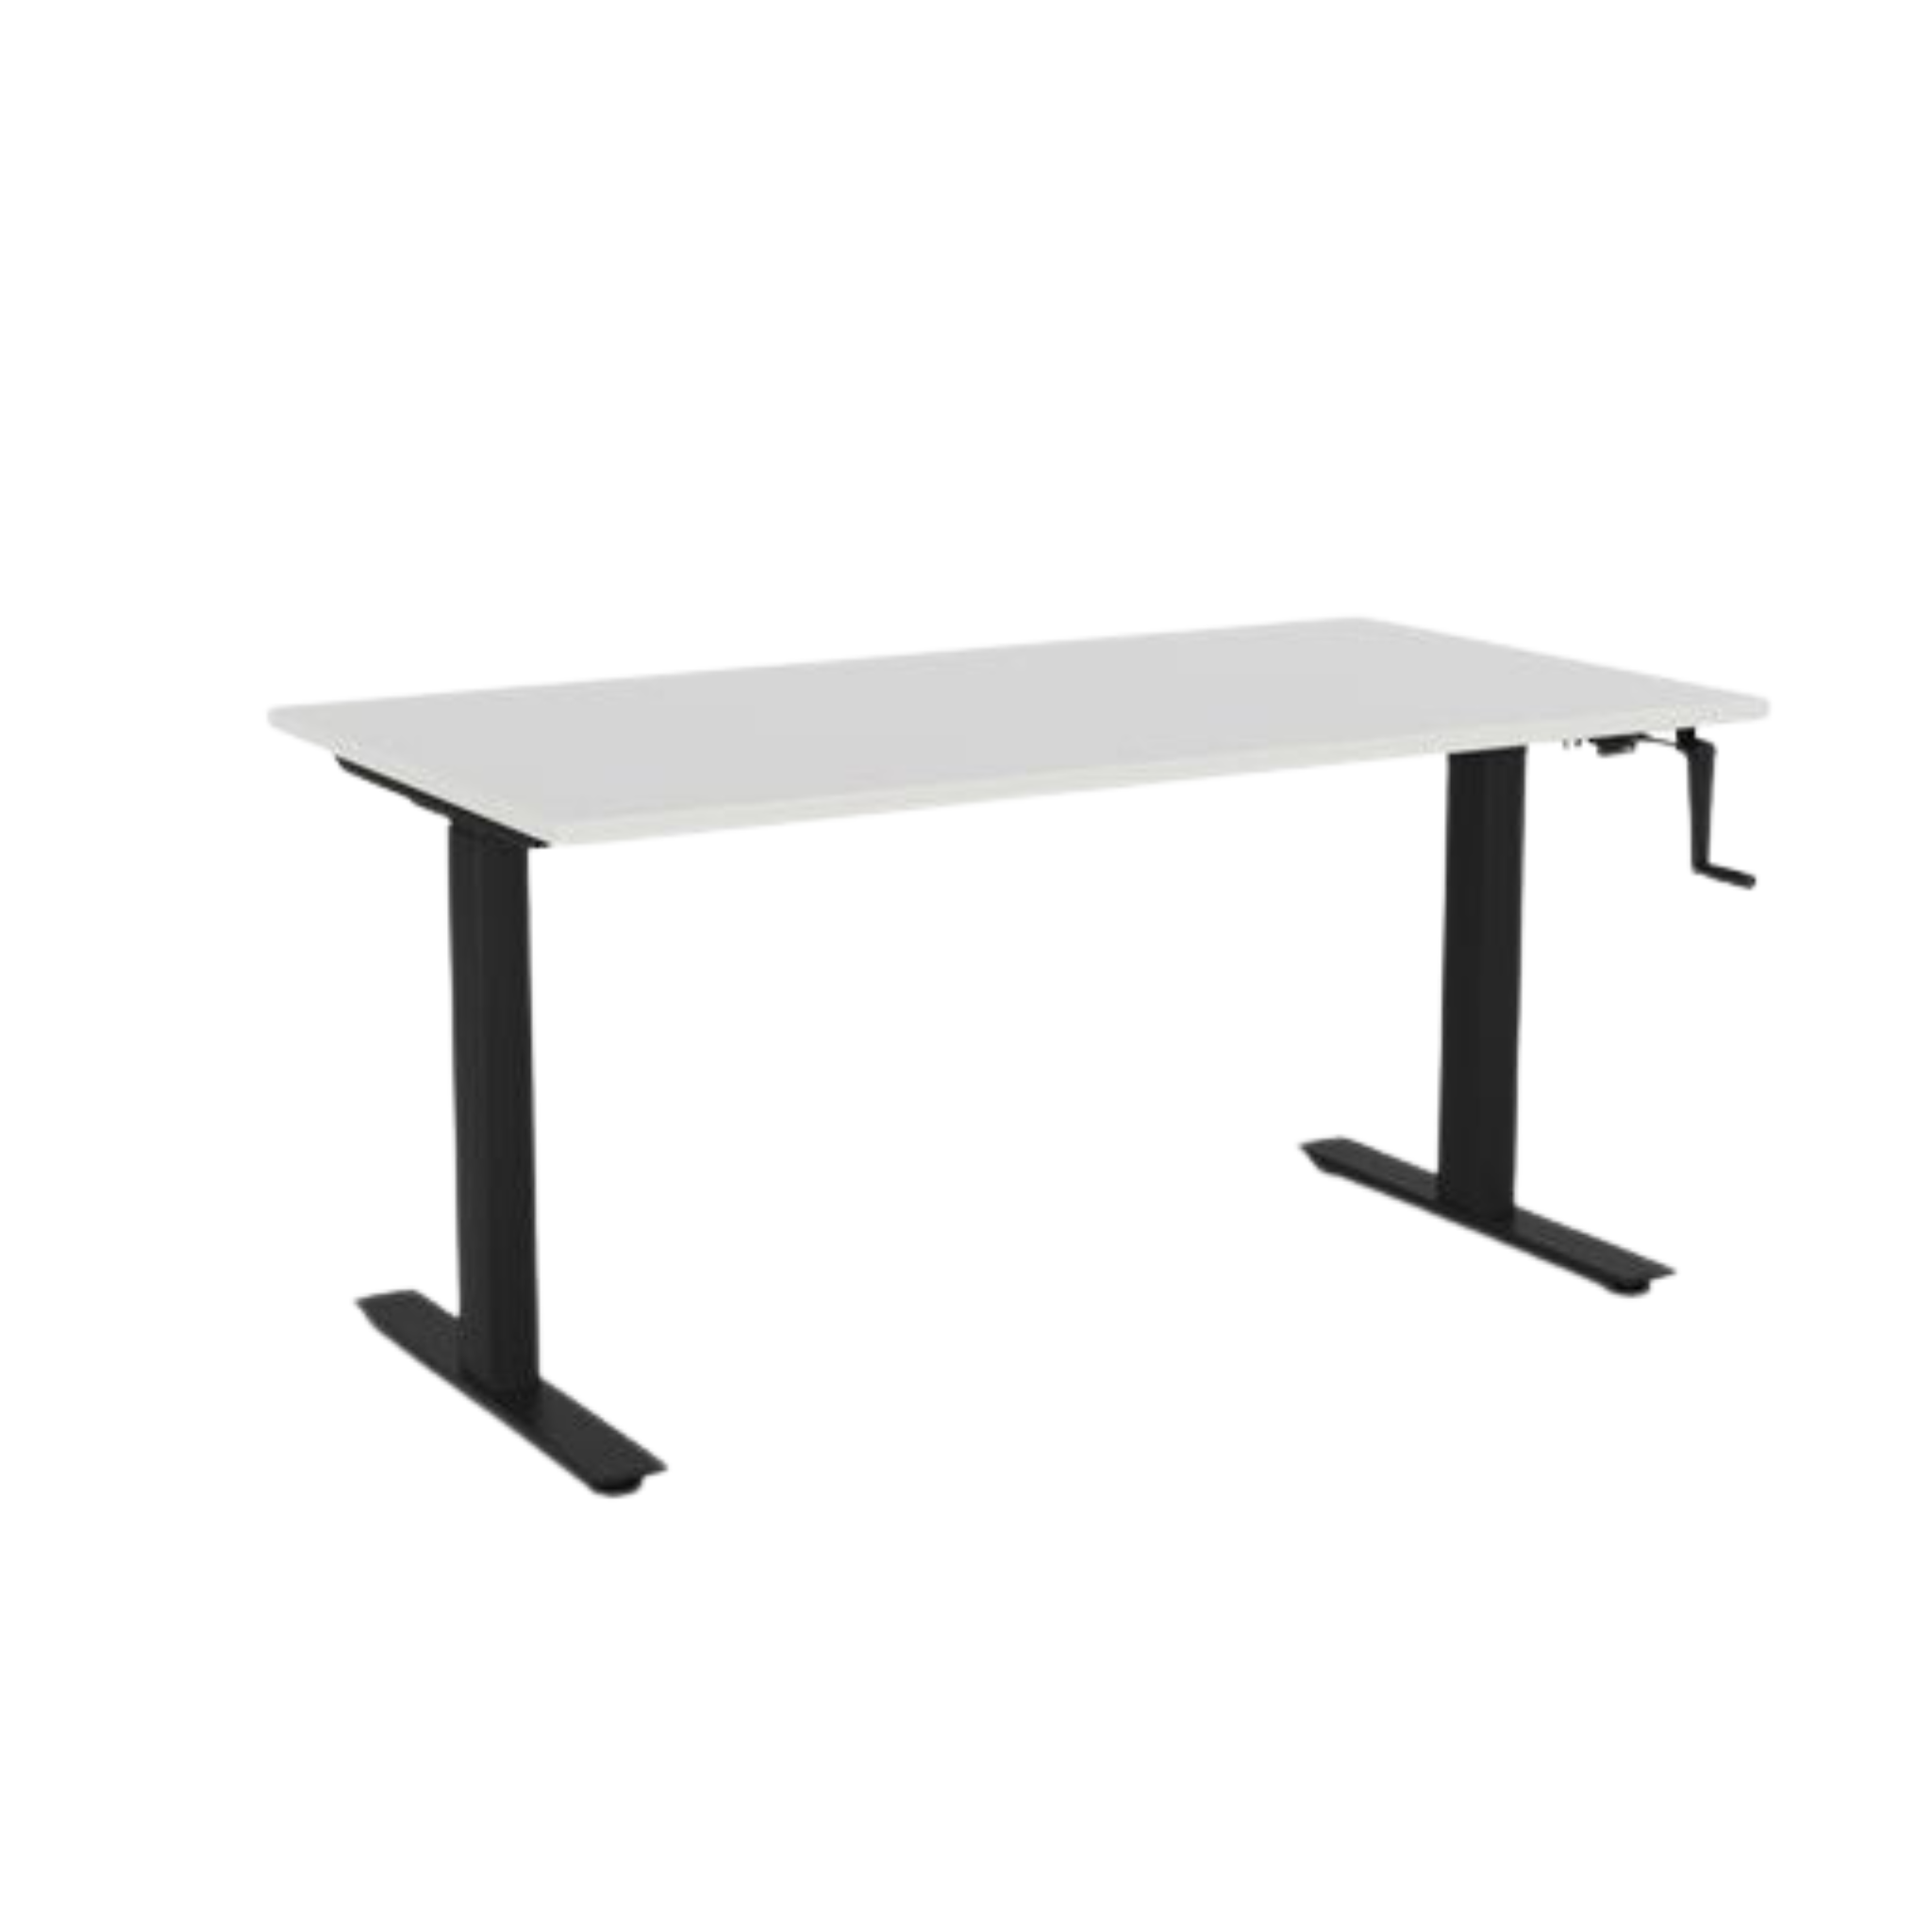 Agile winder sit to stand desk with black frame and white top